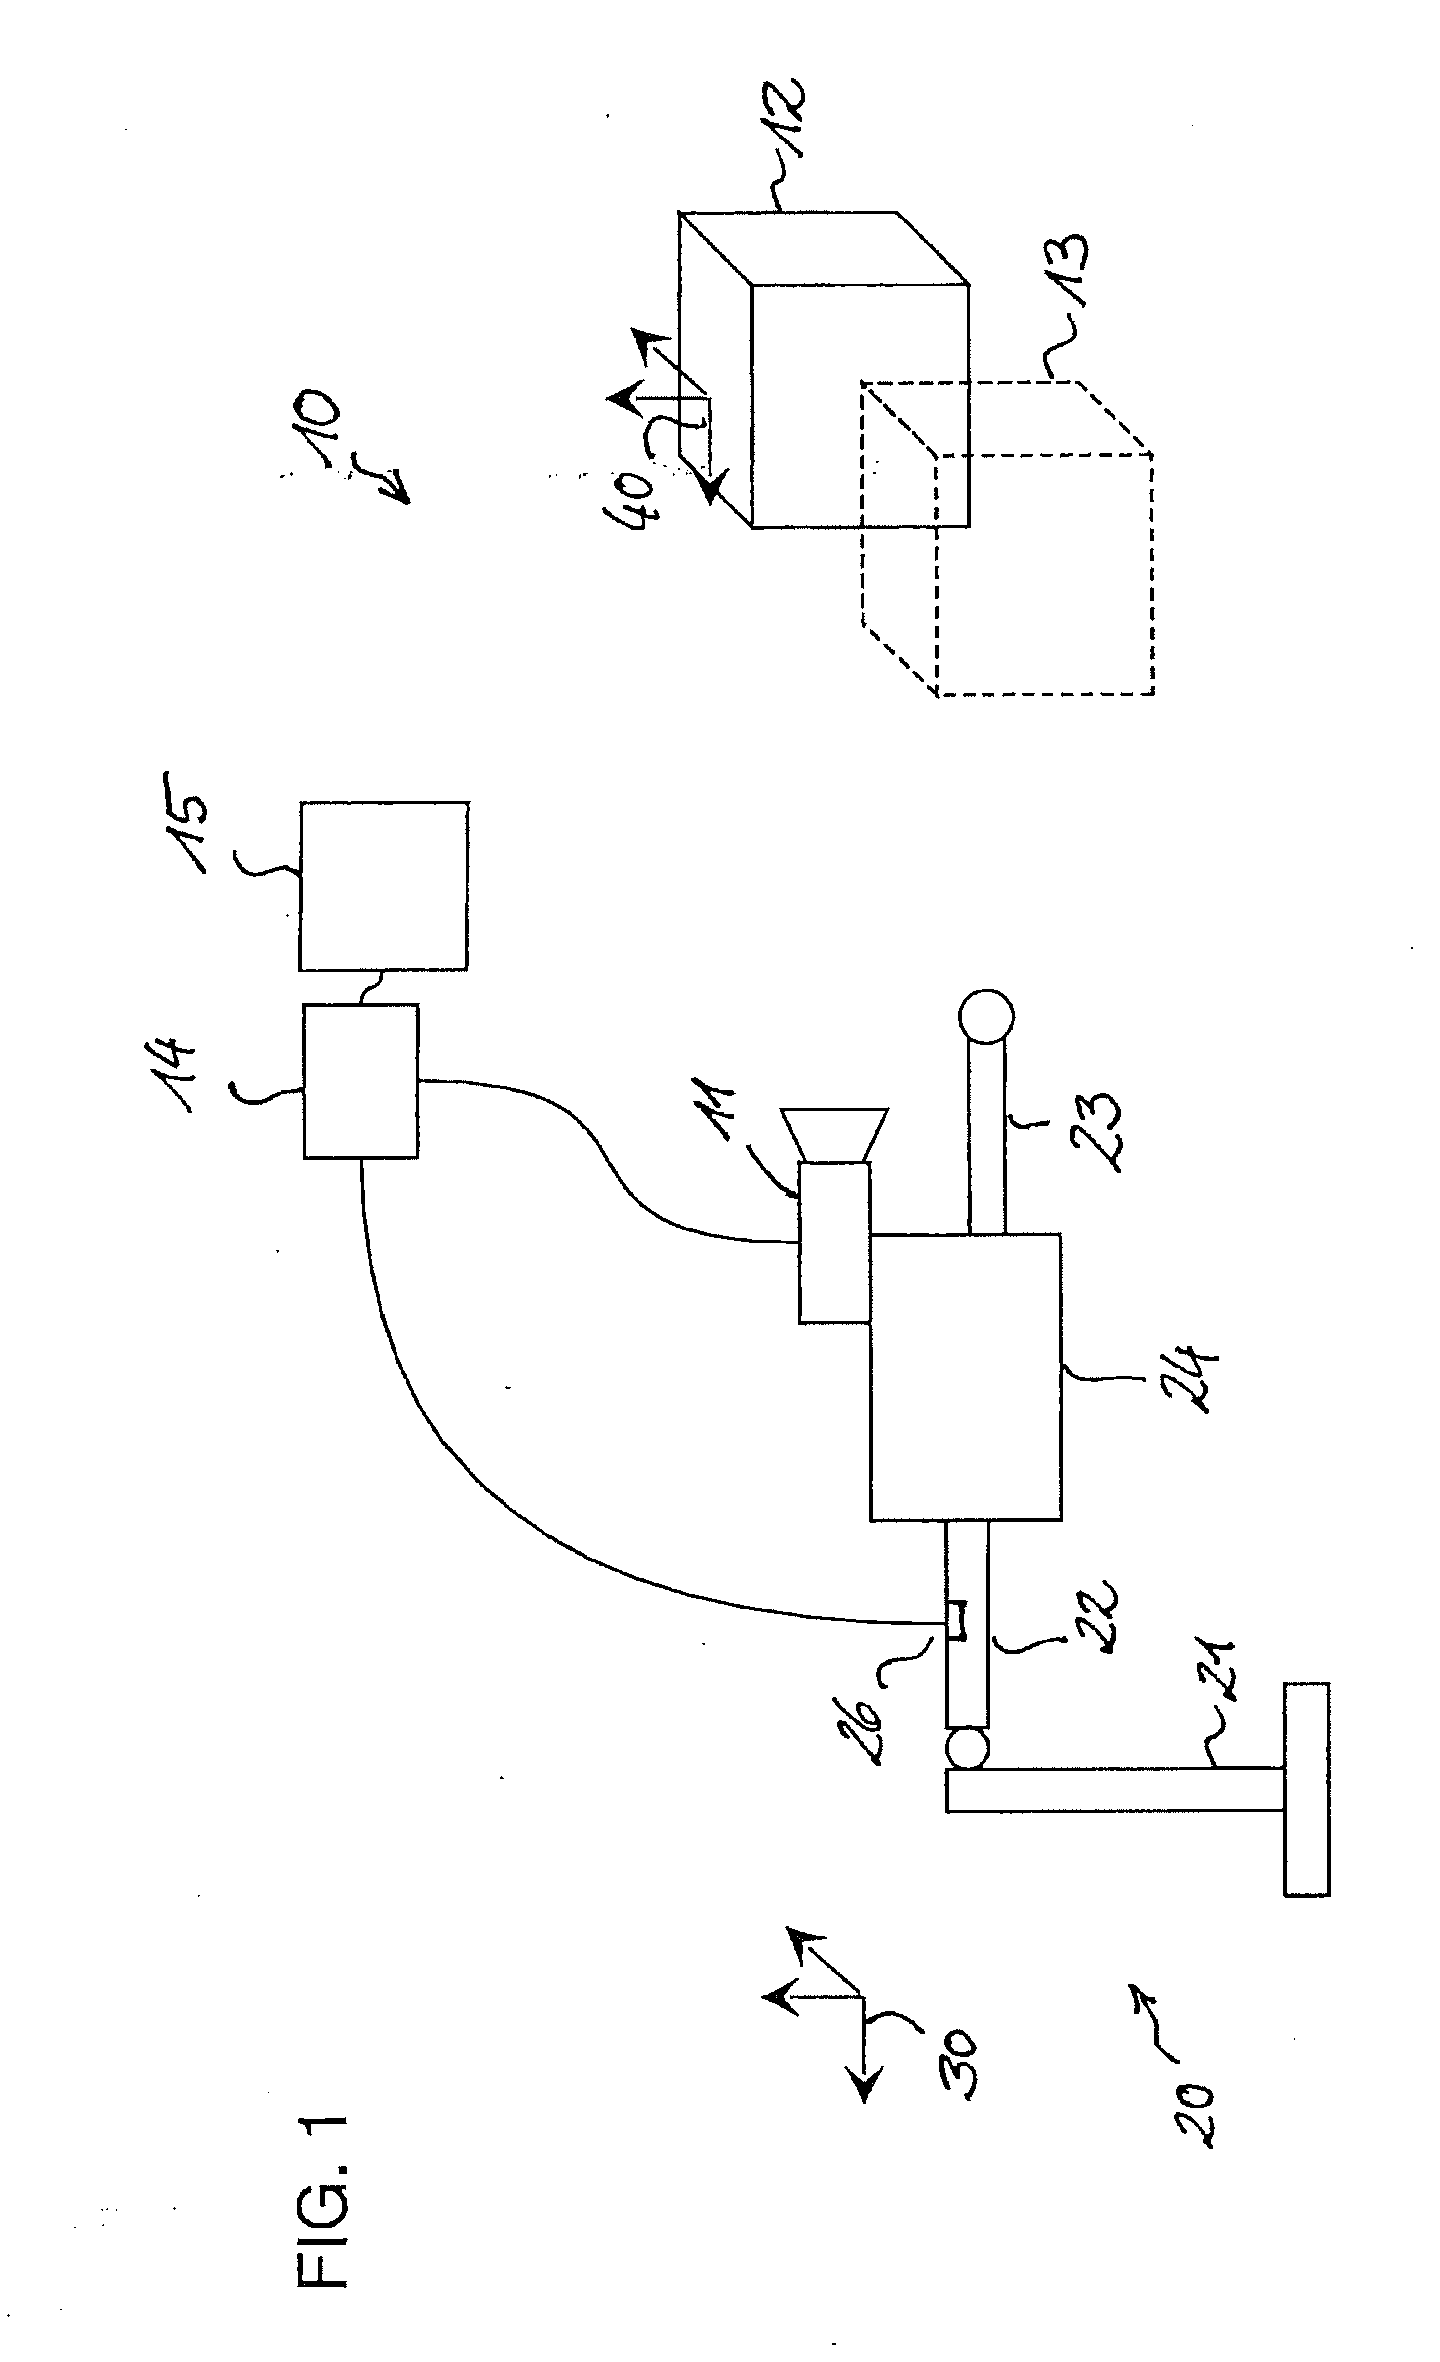 Method and system for ascertaining the position and orientation of a camera relative to a real object